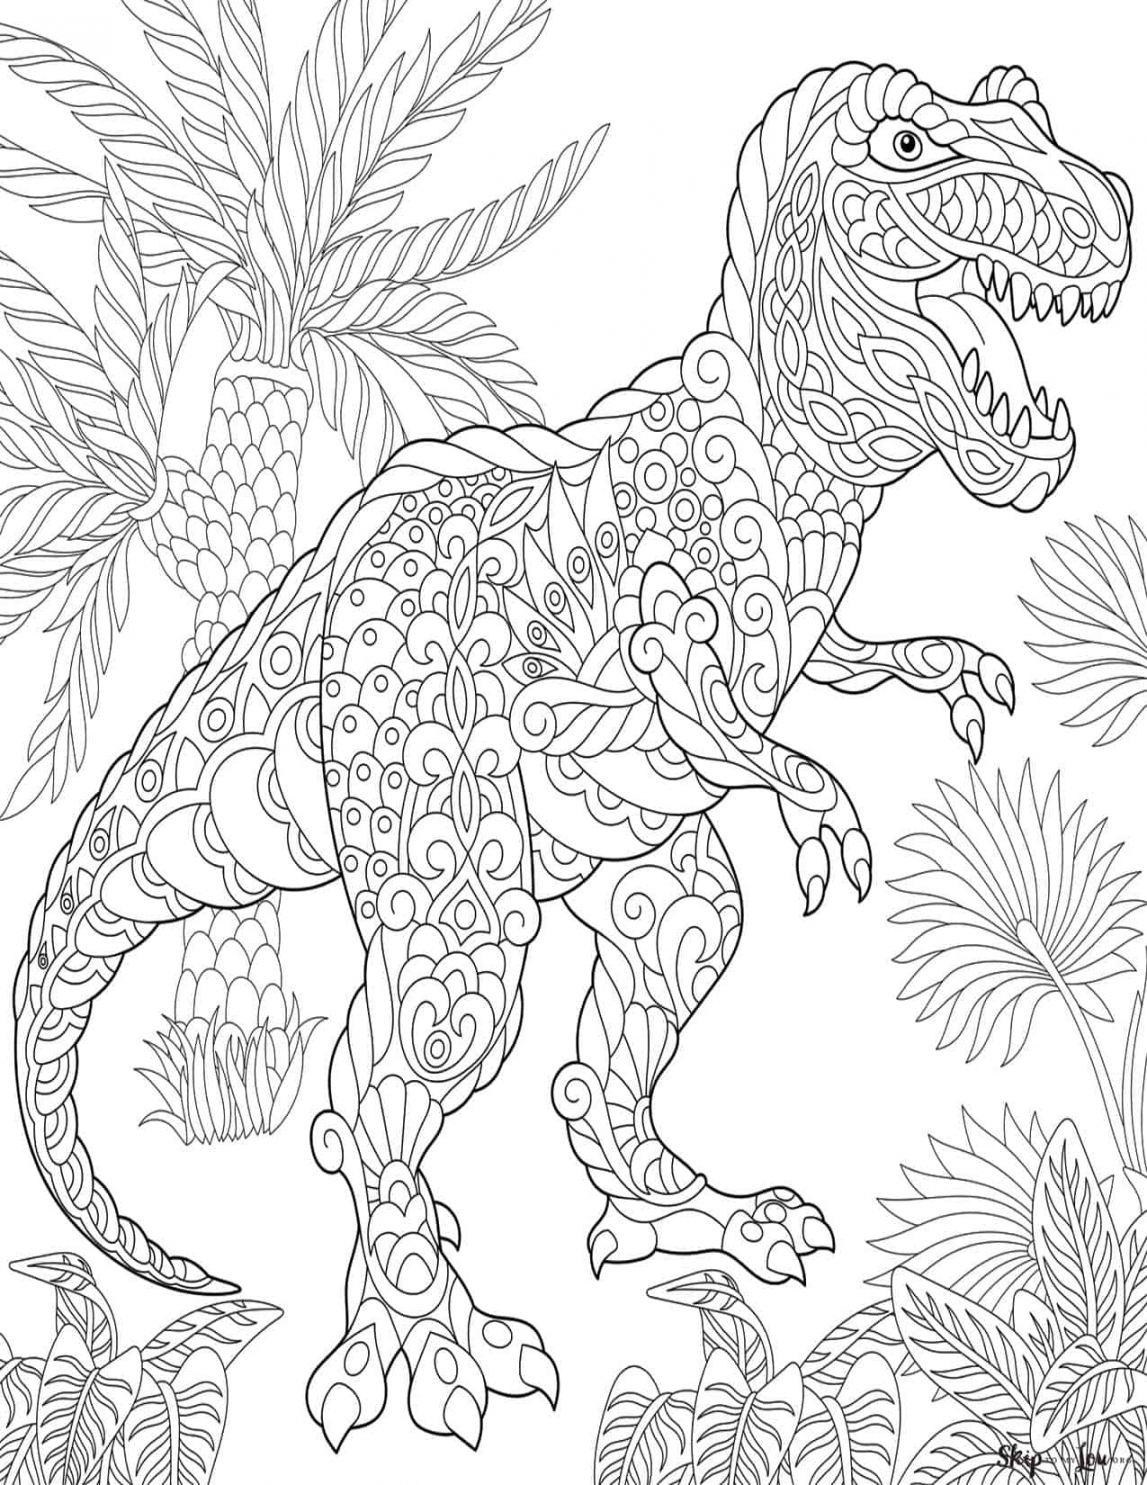 Free Printable Dinosaur Coloring Pages - Printable - Dinosaur Coloring Pages Free Printables  Skip To My Lou